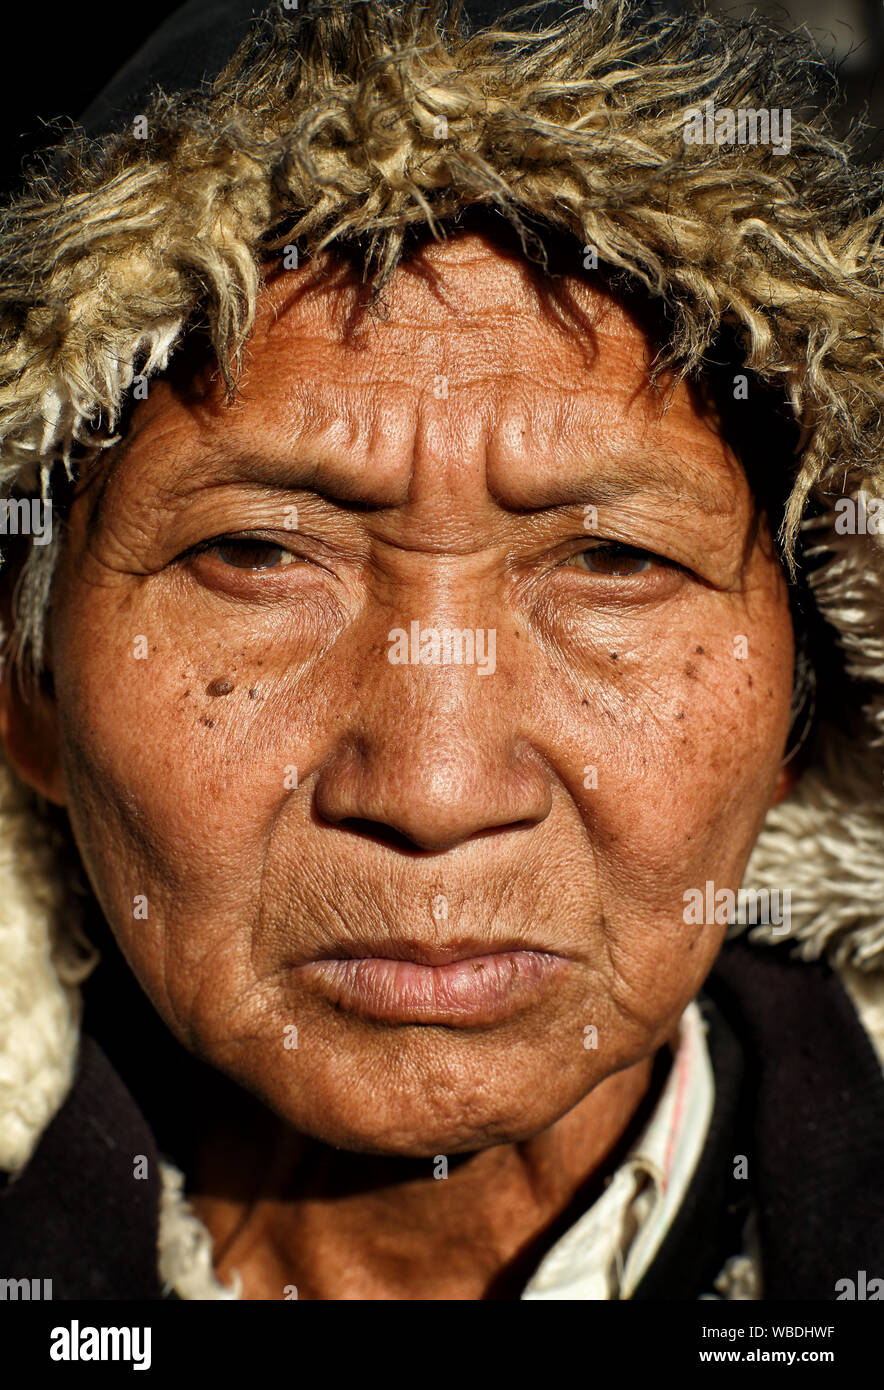 Palaung man in a village near Hsipaw, Myanmar Stock Photo